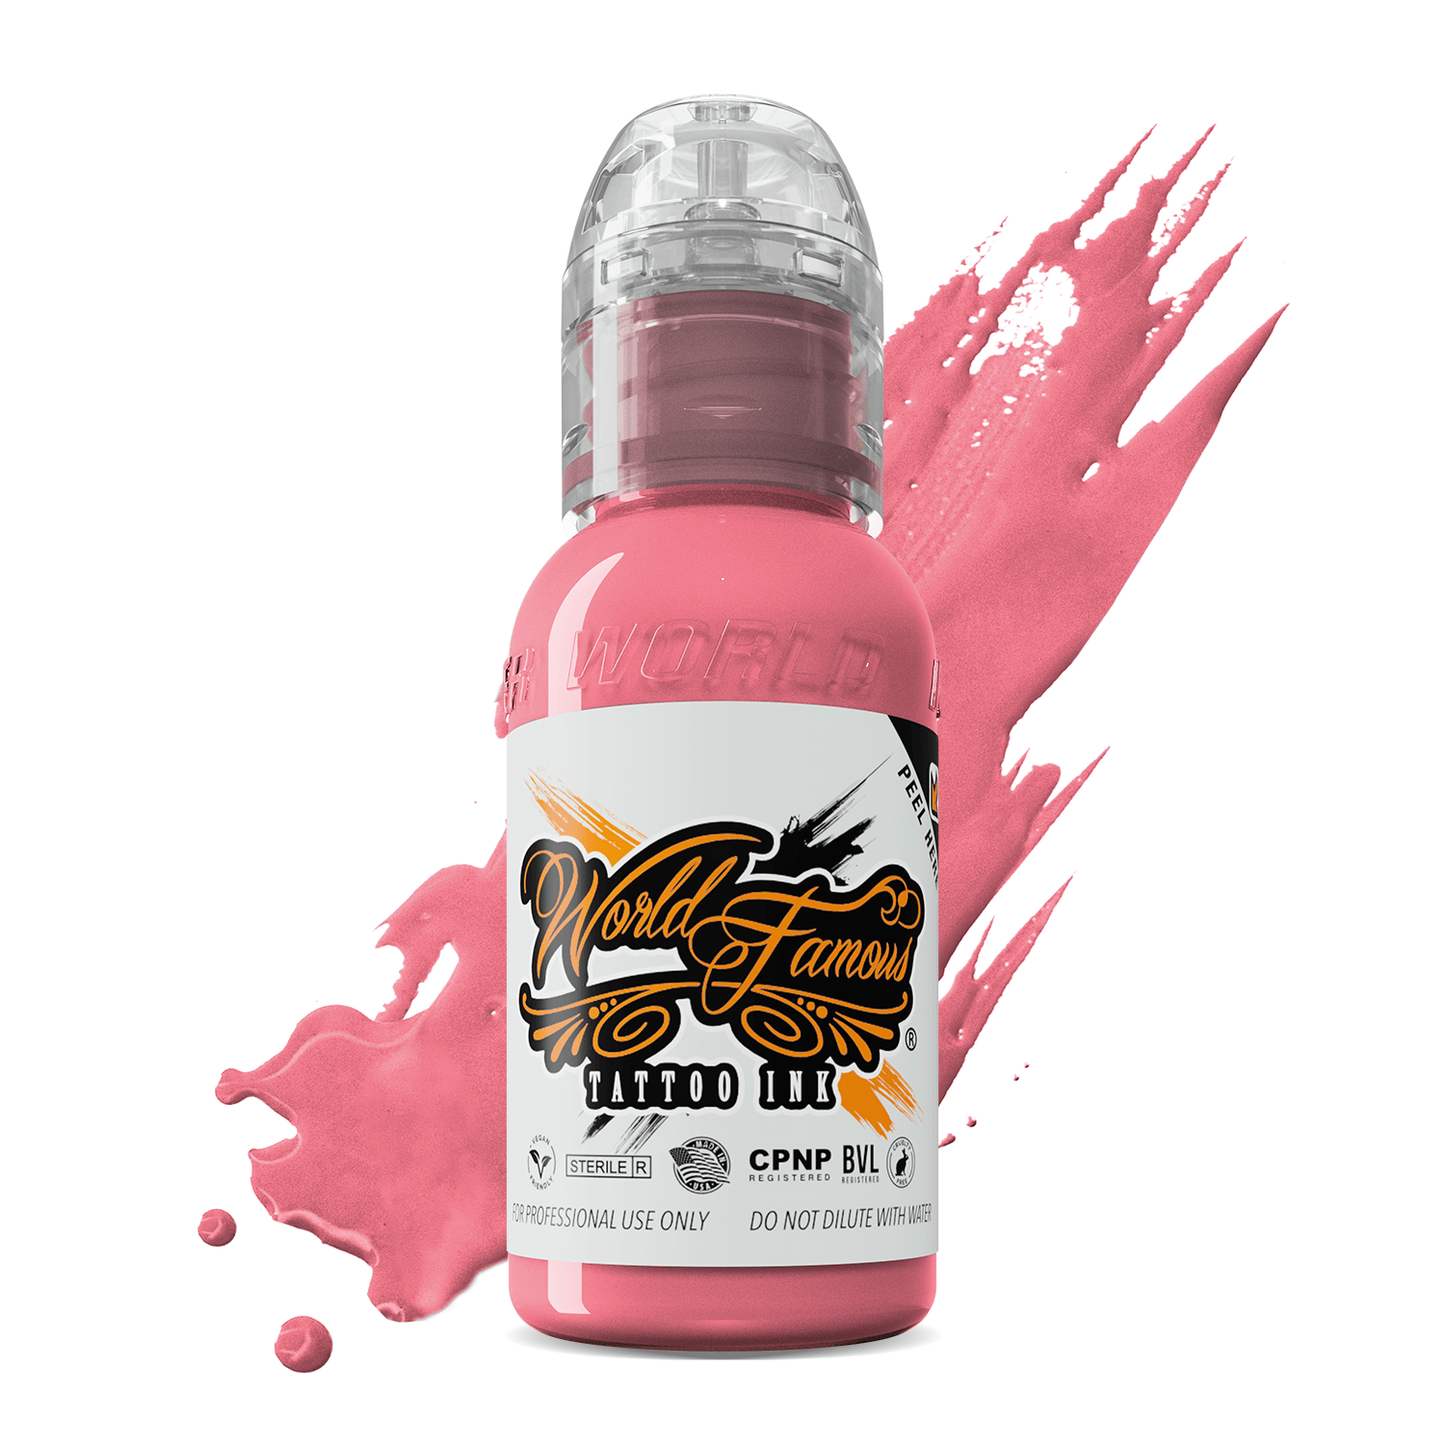 WFFPP1 World Famous Flying Pig Pink 1oz